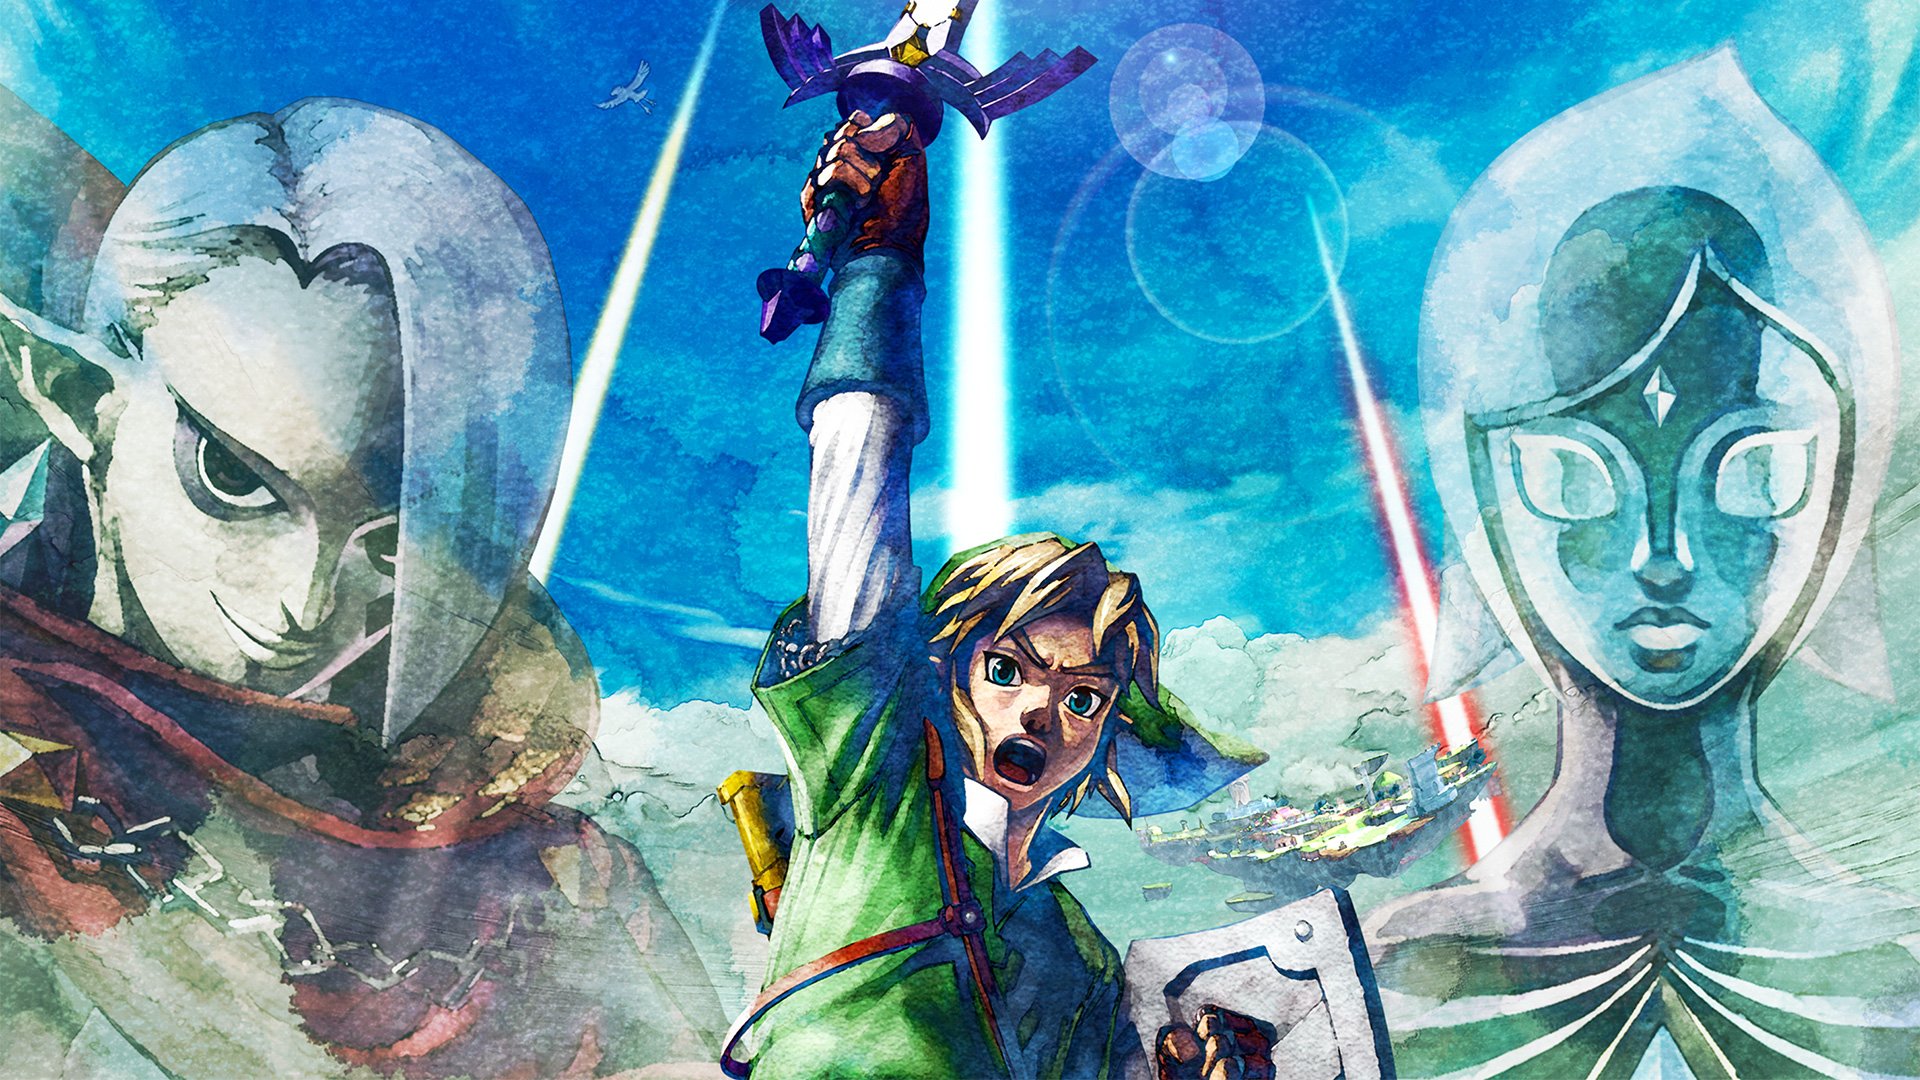 Legend of Zelda: Skyward Sword' Switch Rumors Rise from Producer's Comments